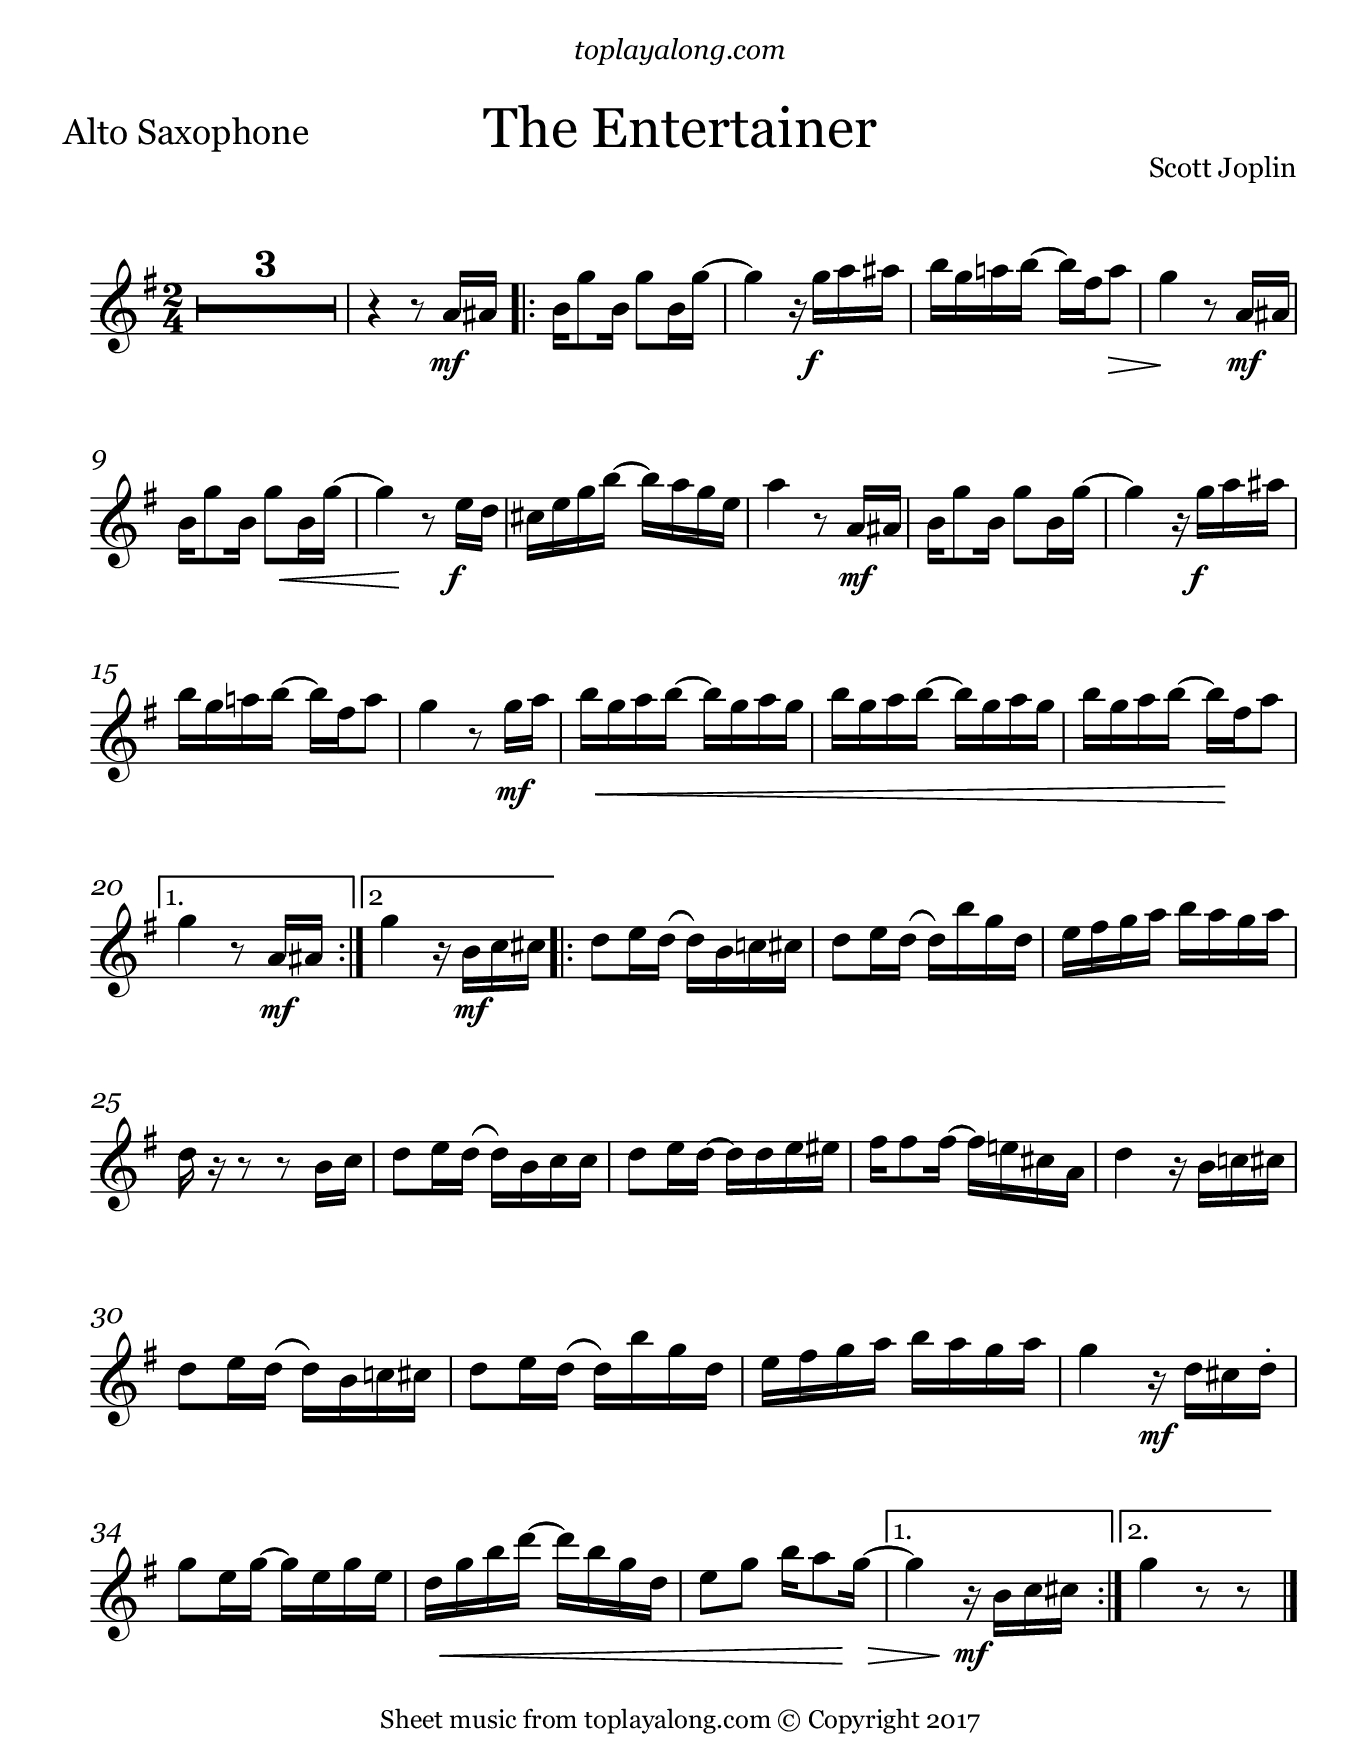 The Entertainer – Toplayalong - Free Printable Sheet Music For The Entertainer